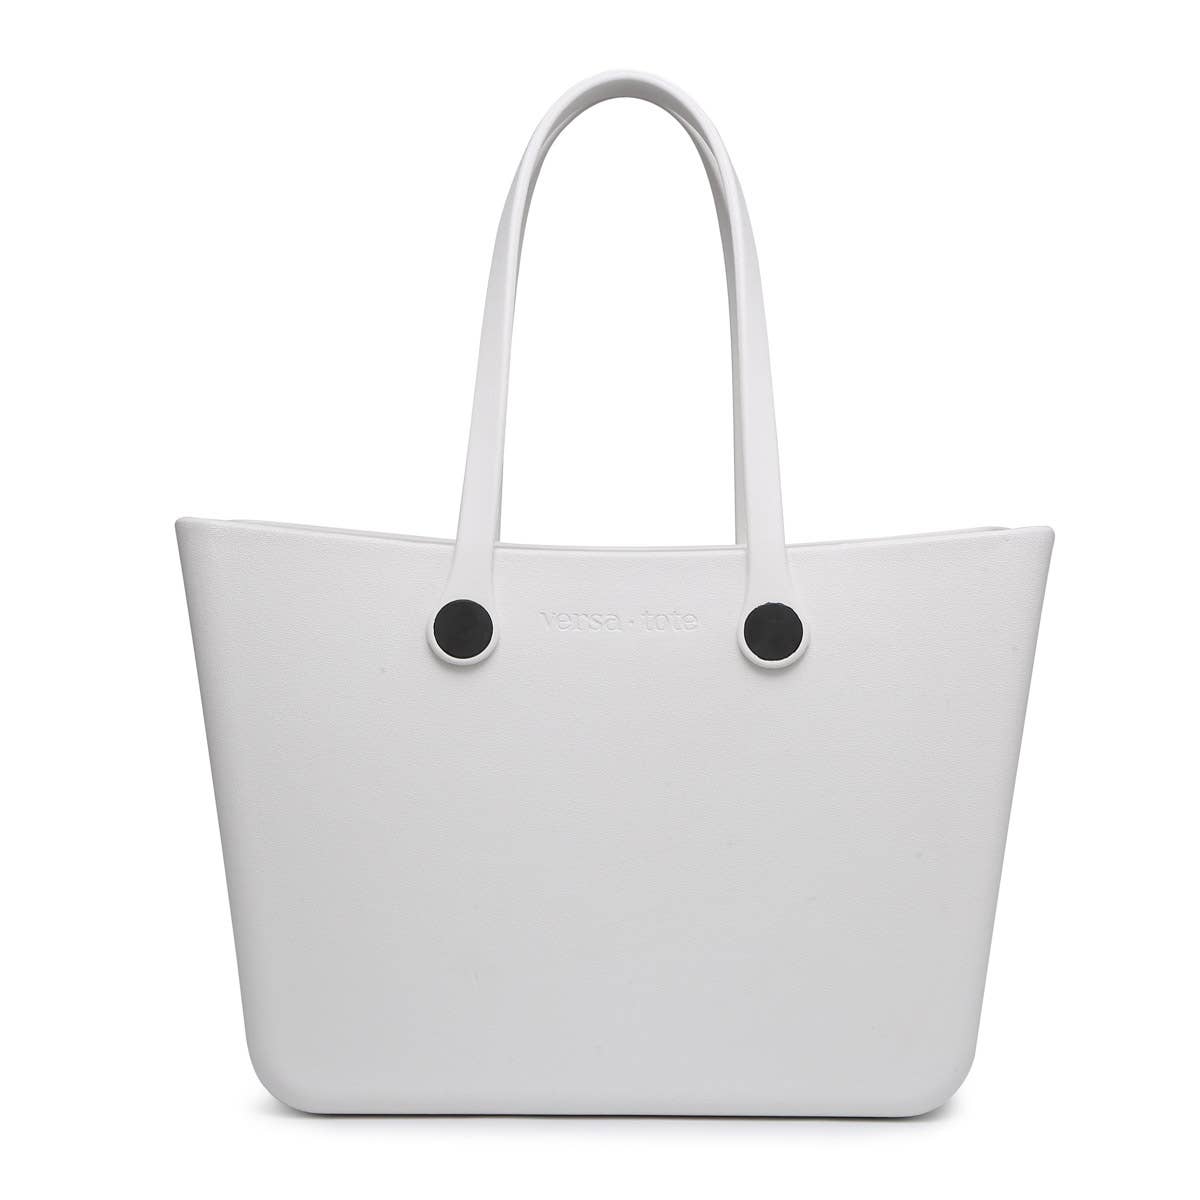 White Carrie Versa Tote w/ Interchangeable Straps